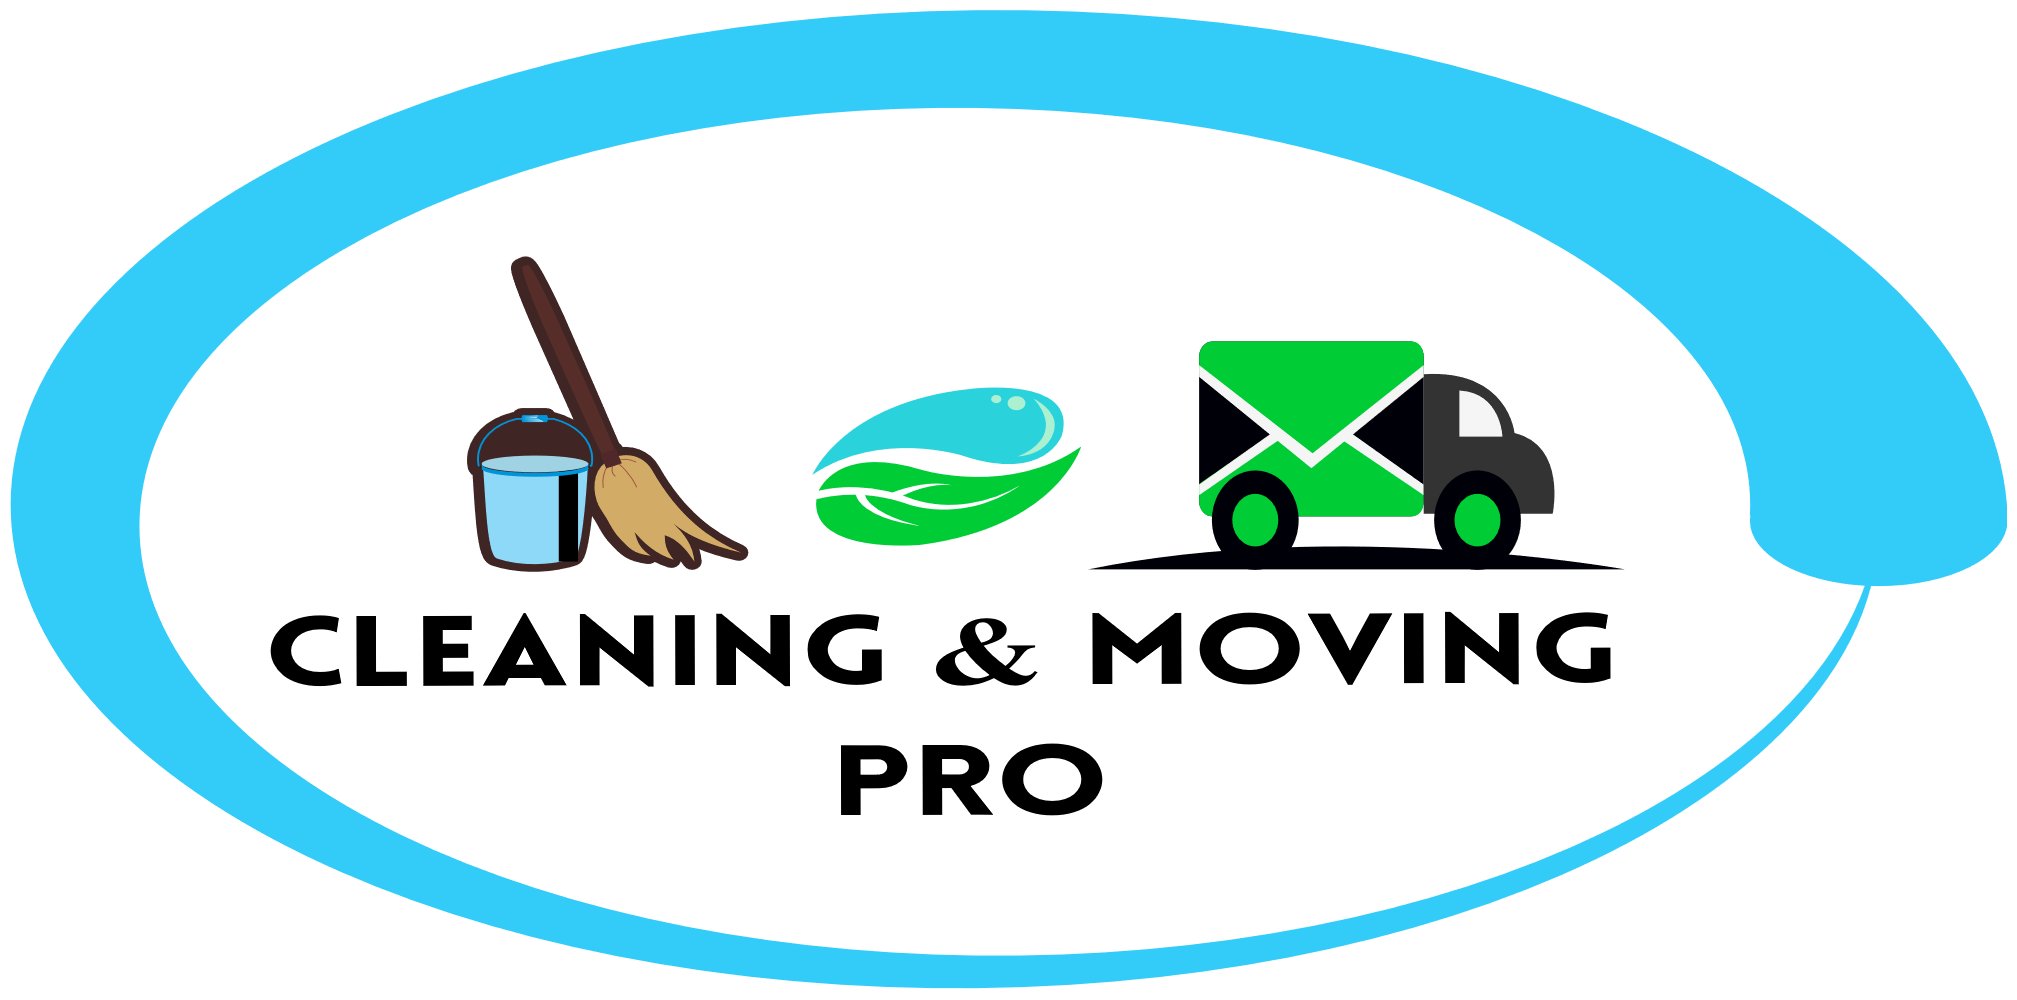 Office Equipment Cleaning Service-CLEANING AND MOVING PRO